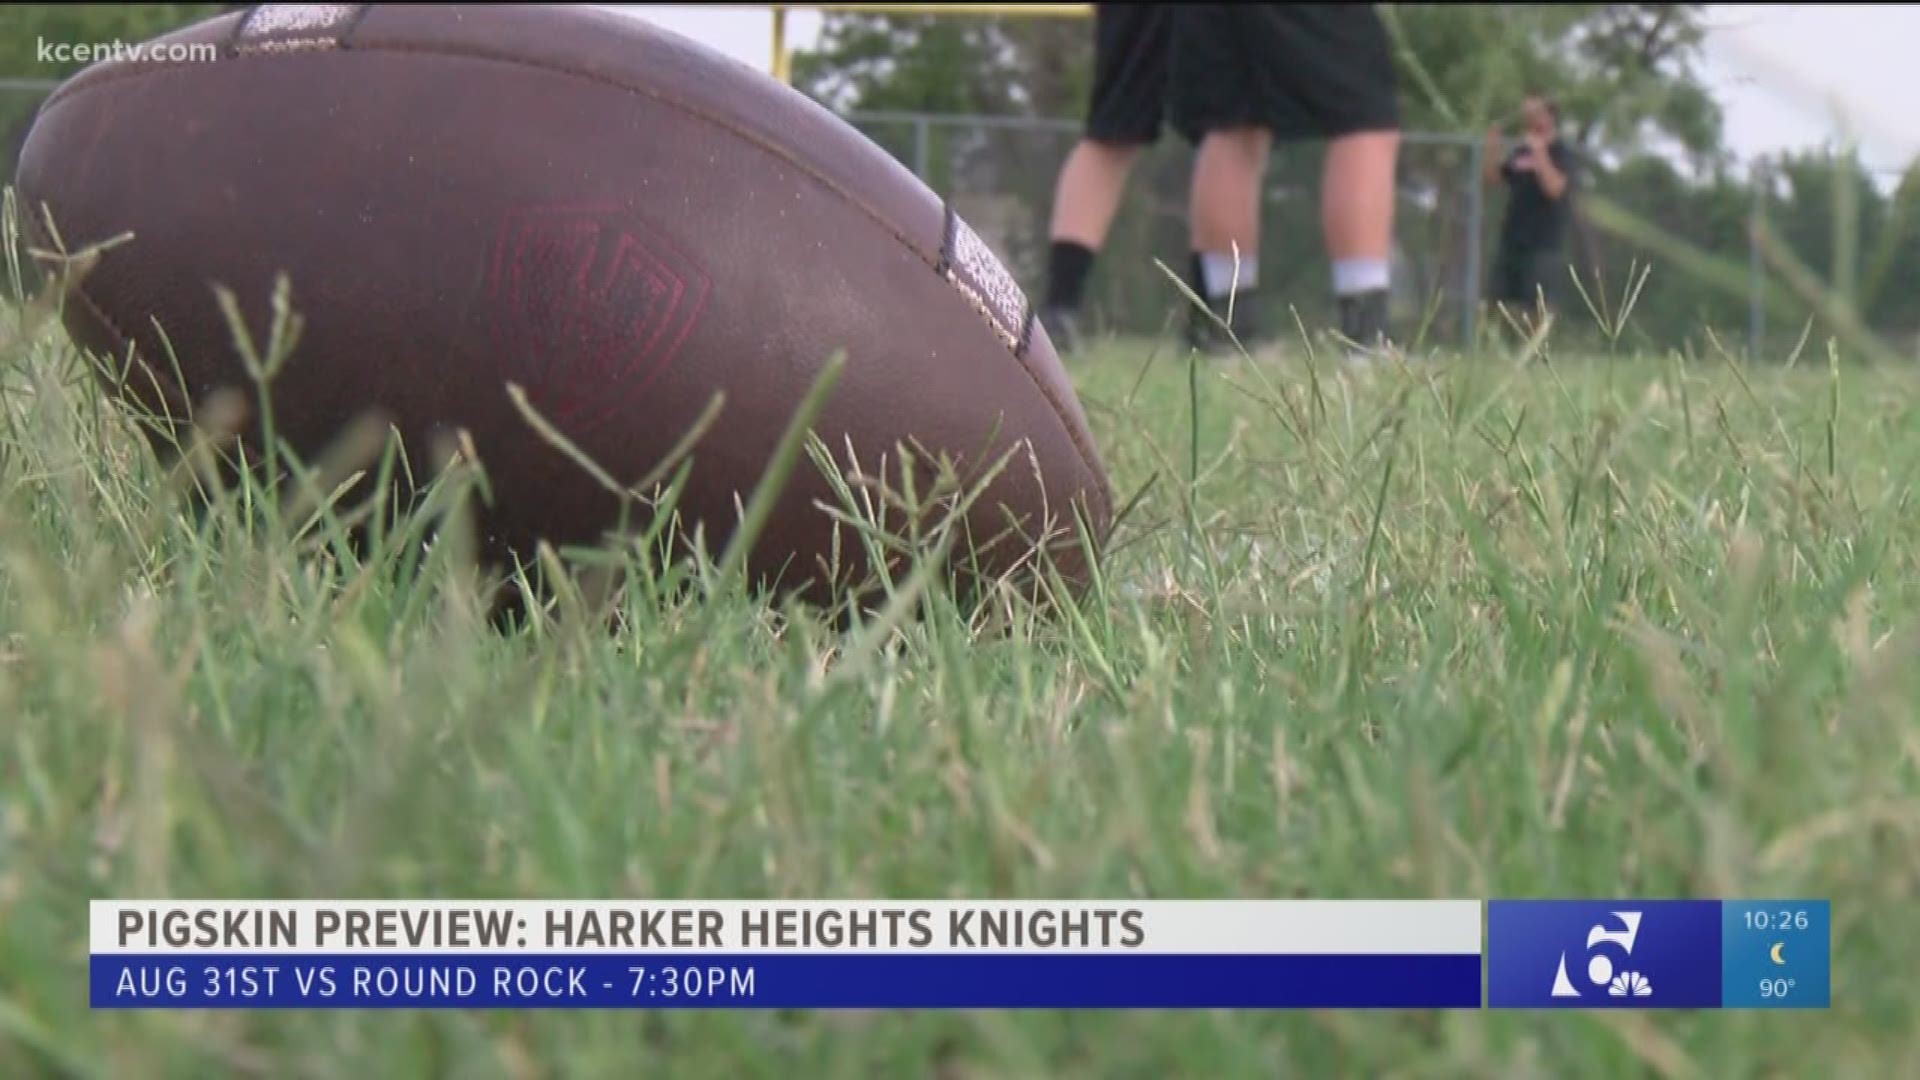 Pigskin Preview: Harker Heights Knights